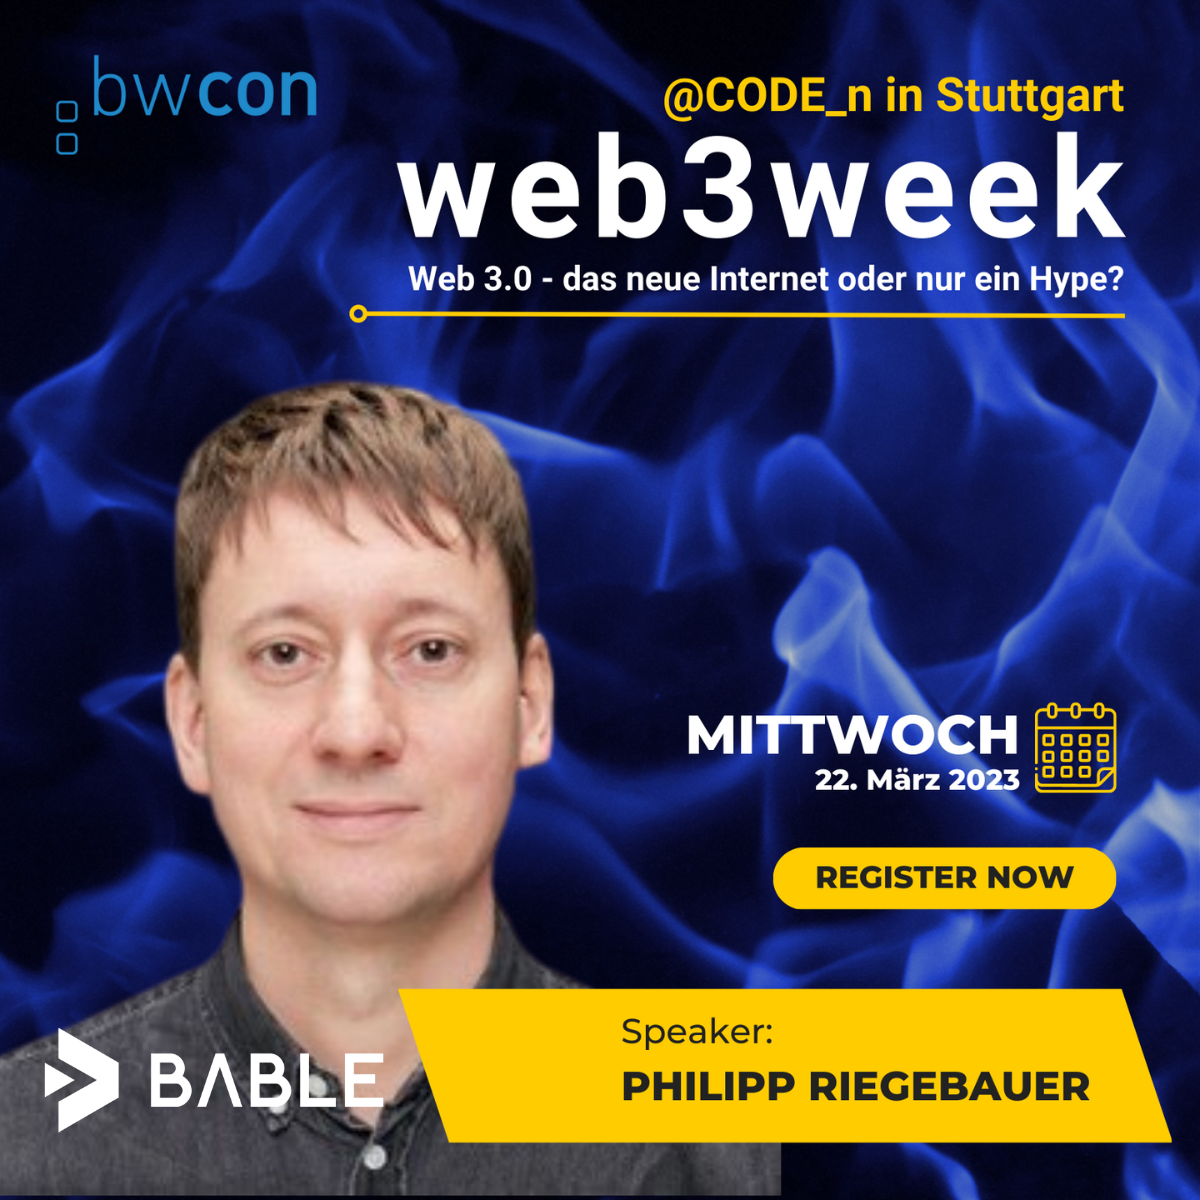 Web3week: Web 3.0 – the new Internet or just hype?